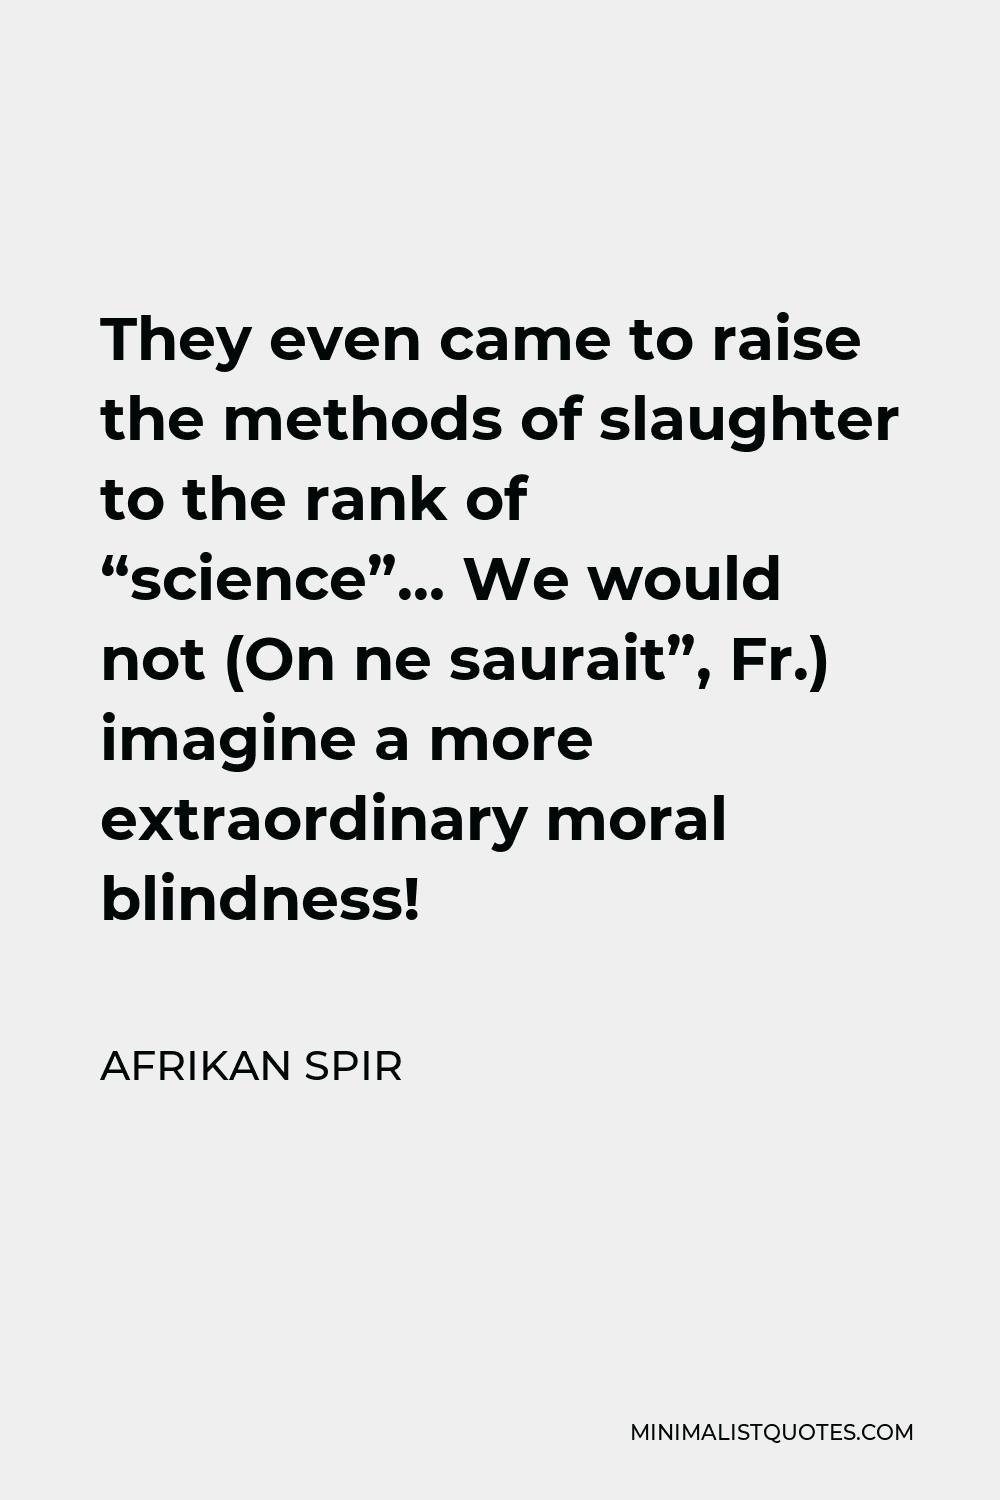 Afrikan Spir Quote - They even came to raise the methods of slaughter to the rank of “science”… We would not (On ne saurait”, Fr.) imagine a more extraordinary moral blindness!